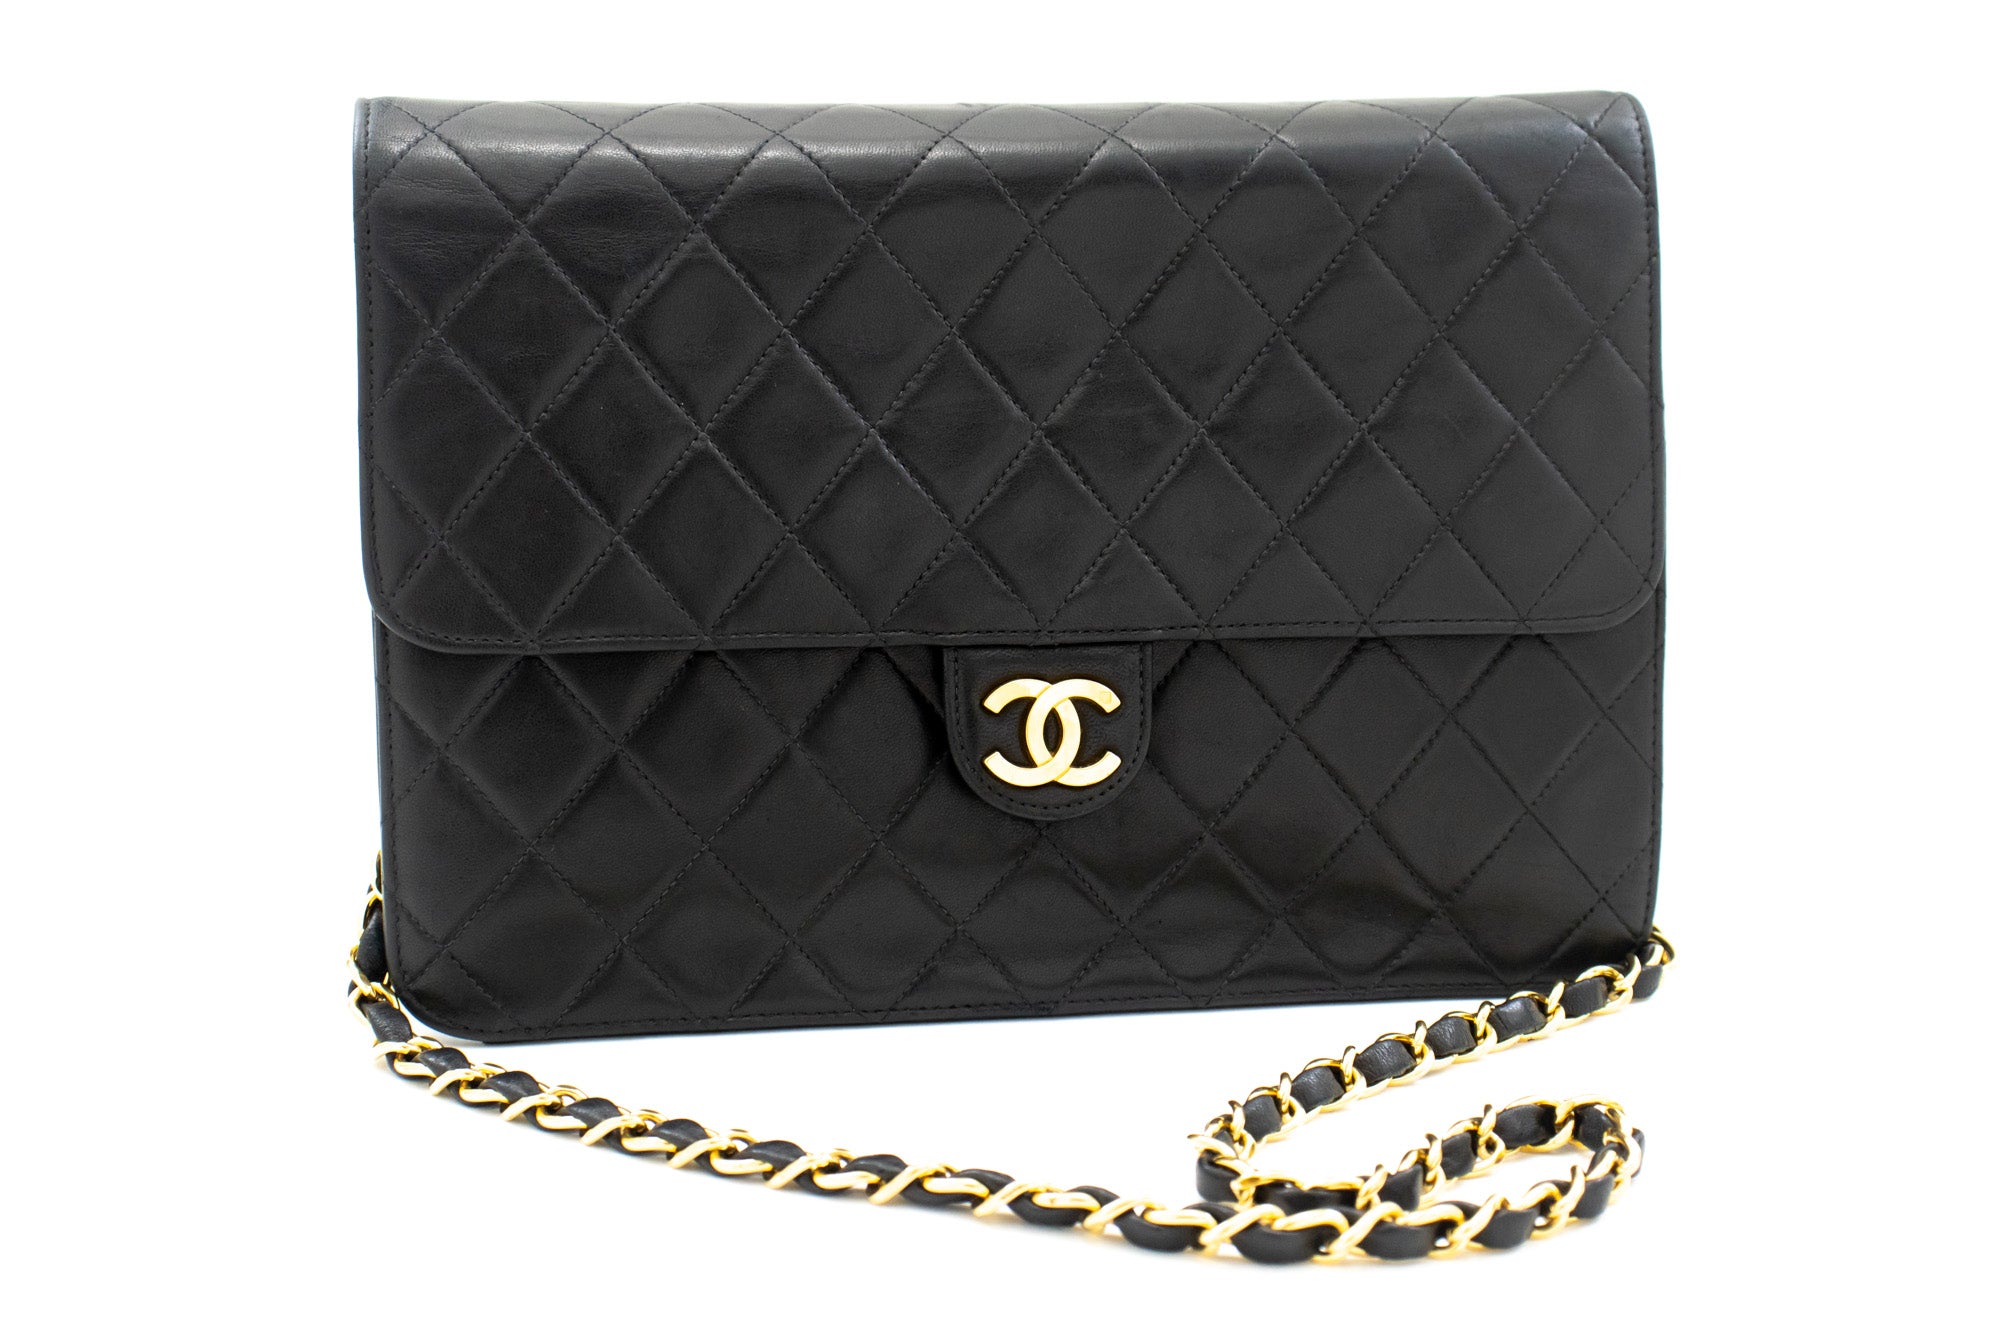 Chanel Chain Shoulder Bag Clutch Black Quilted Flap Lambskin Purse L27